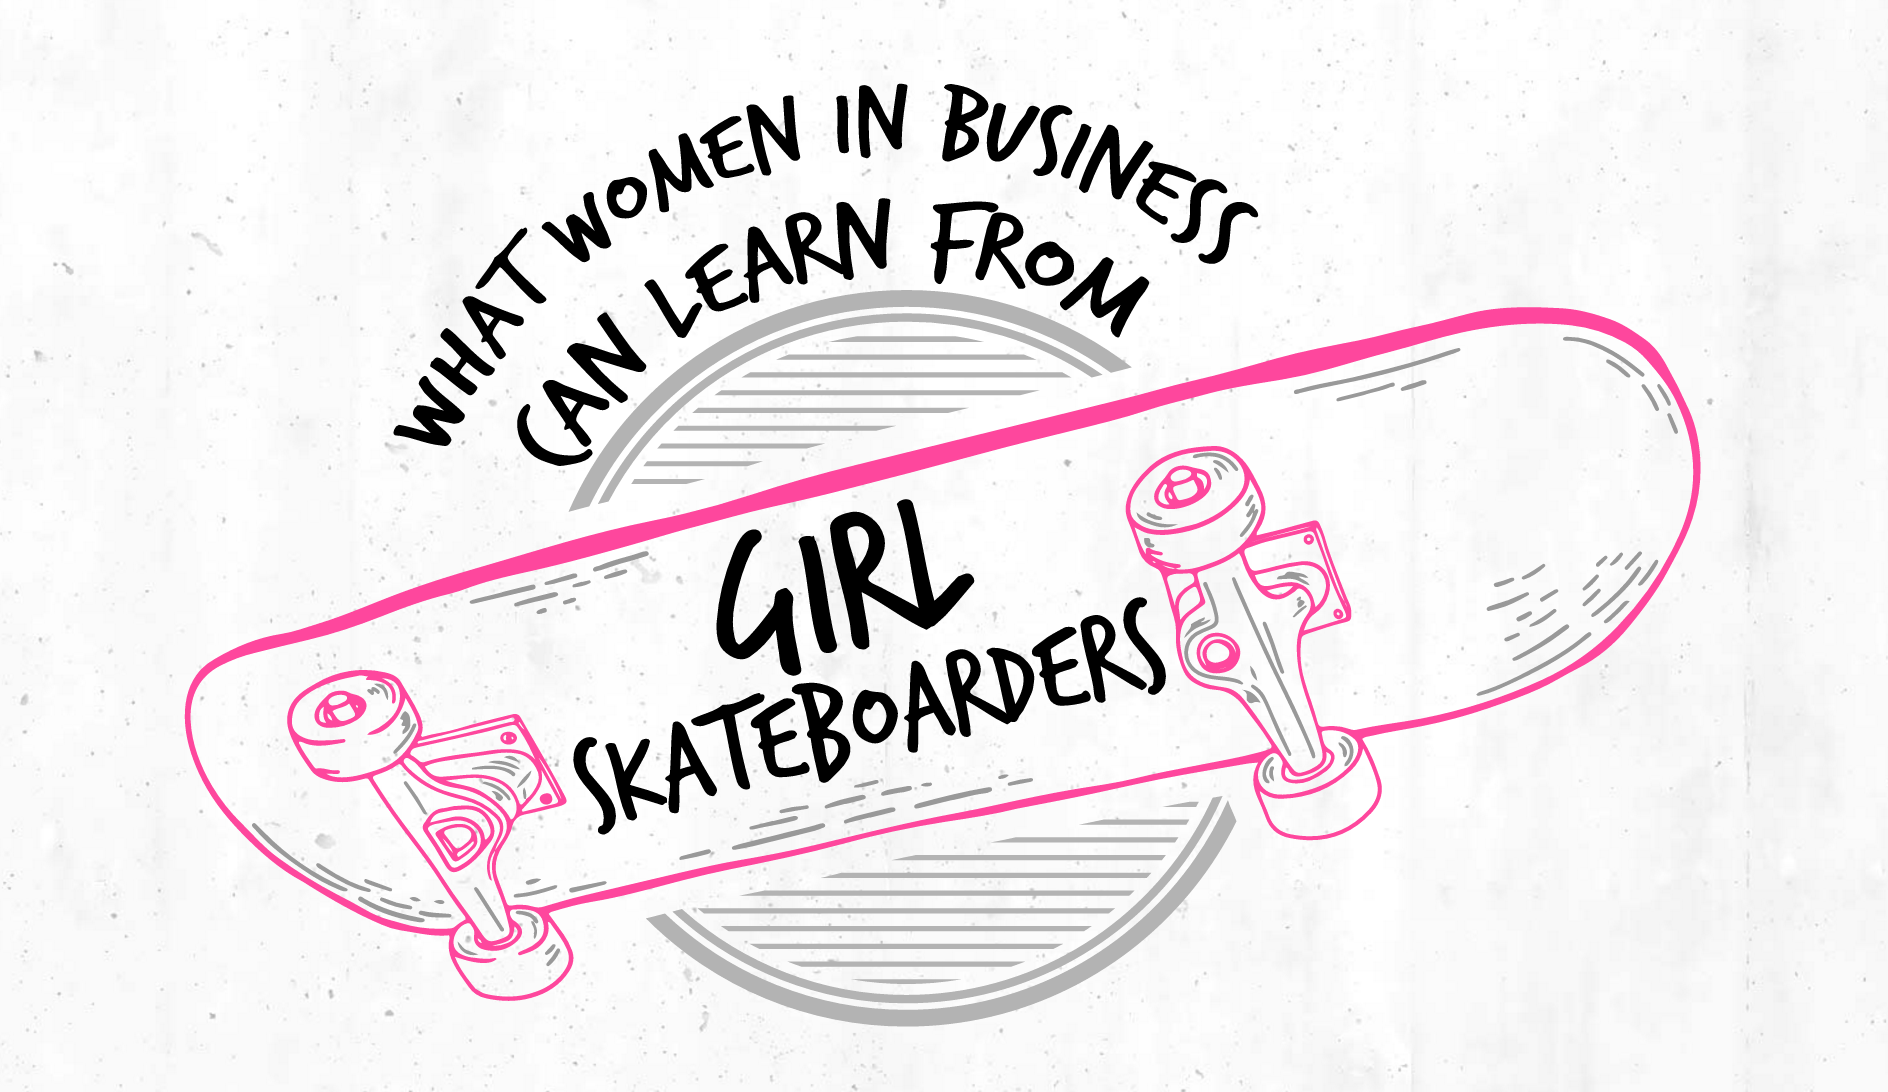 Courtney Payne-Taylor on what Skateboarding can teach Women in business (2016)